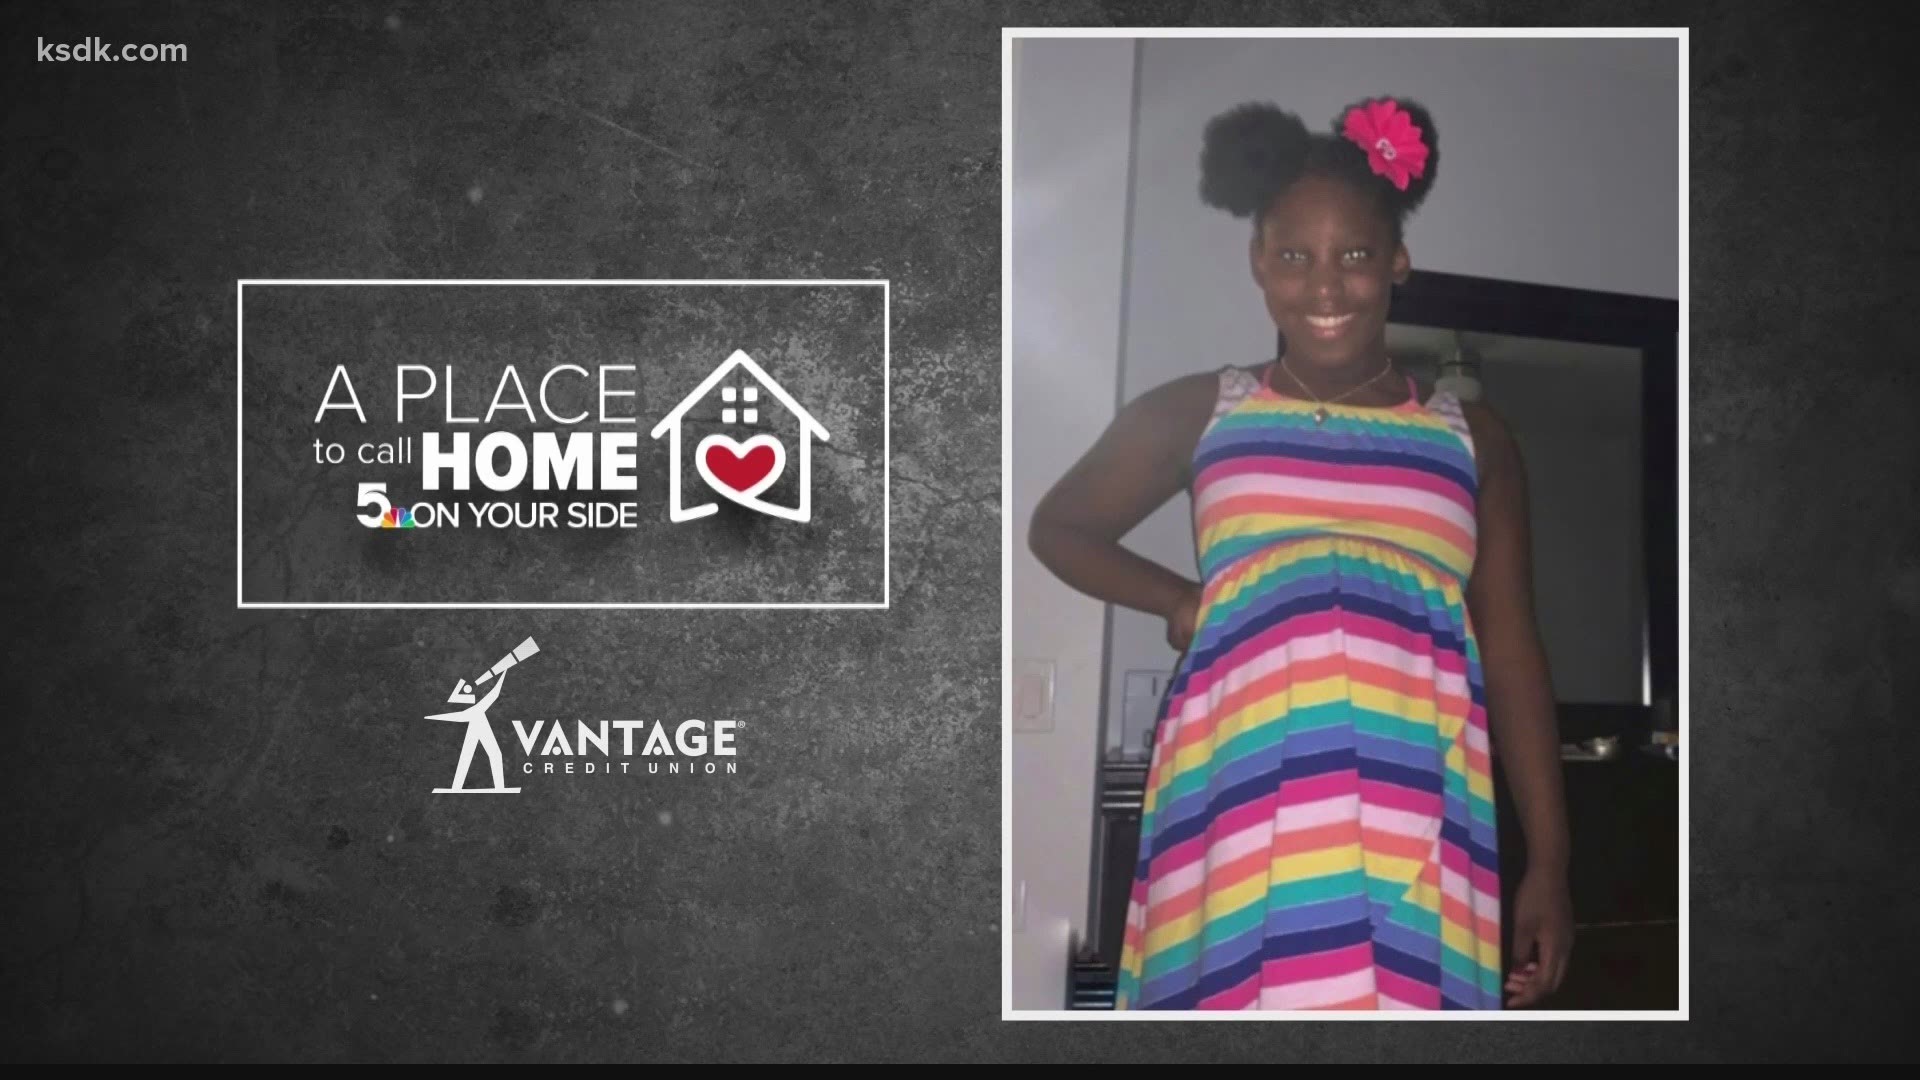 Meet one bright, talented, energetic tween in today's A Place to Call Home.